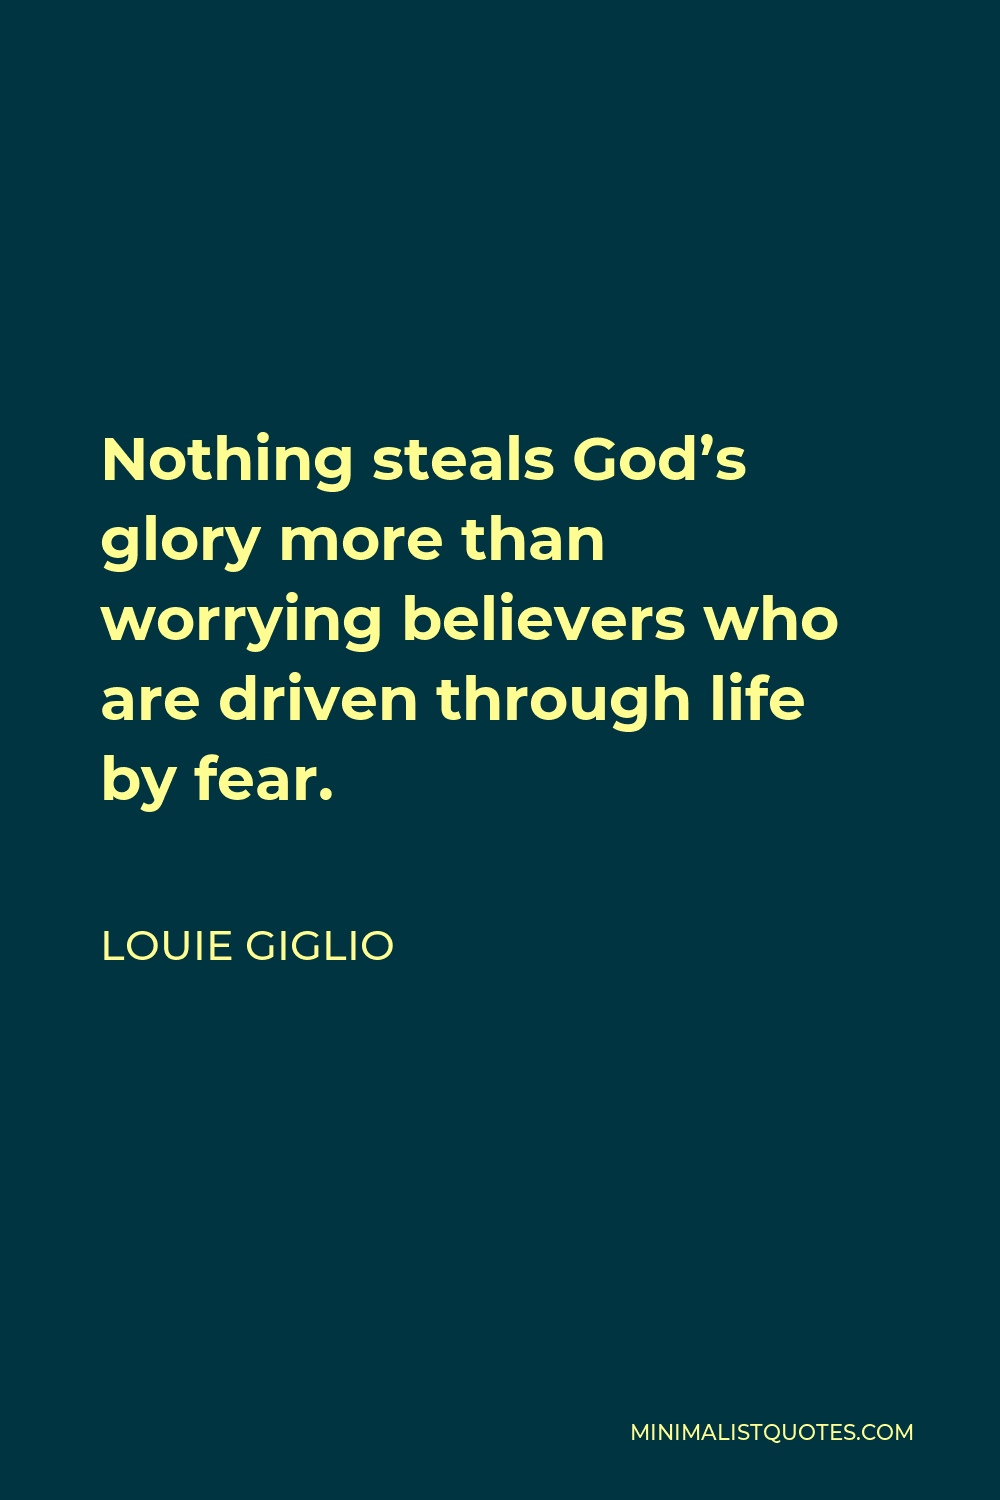 Louie Giglio Quote - Nothing steals God’s glory more than worrying believers who are driven through life by fear.